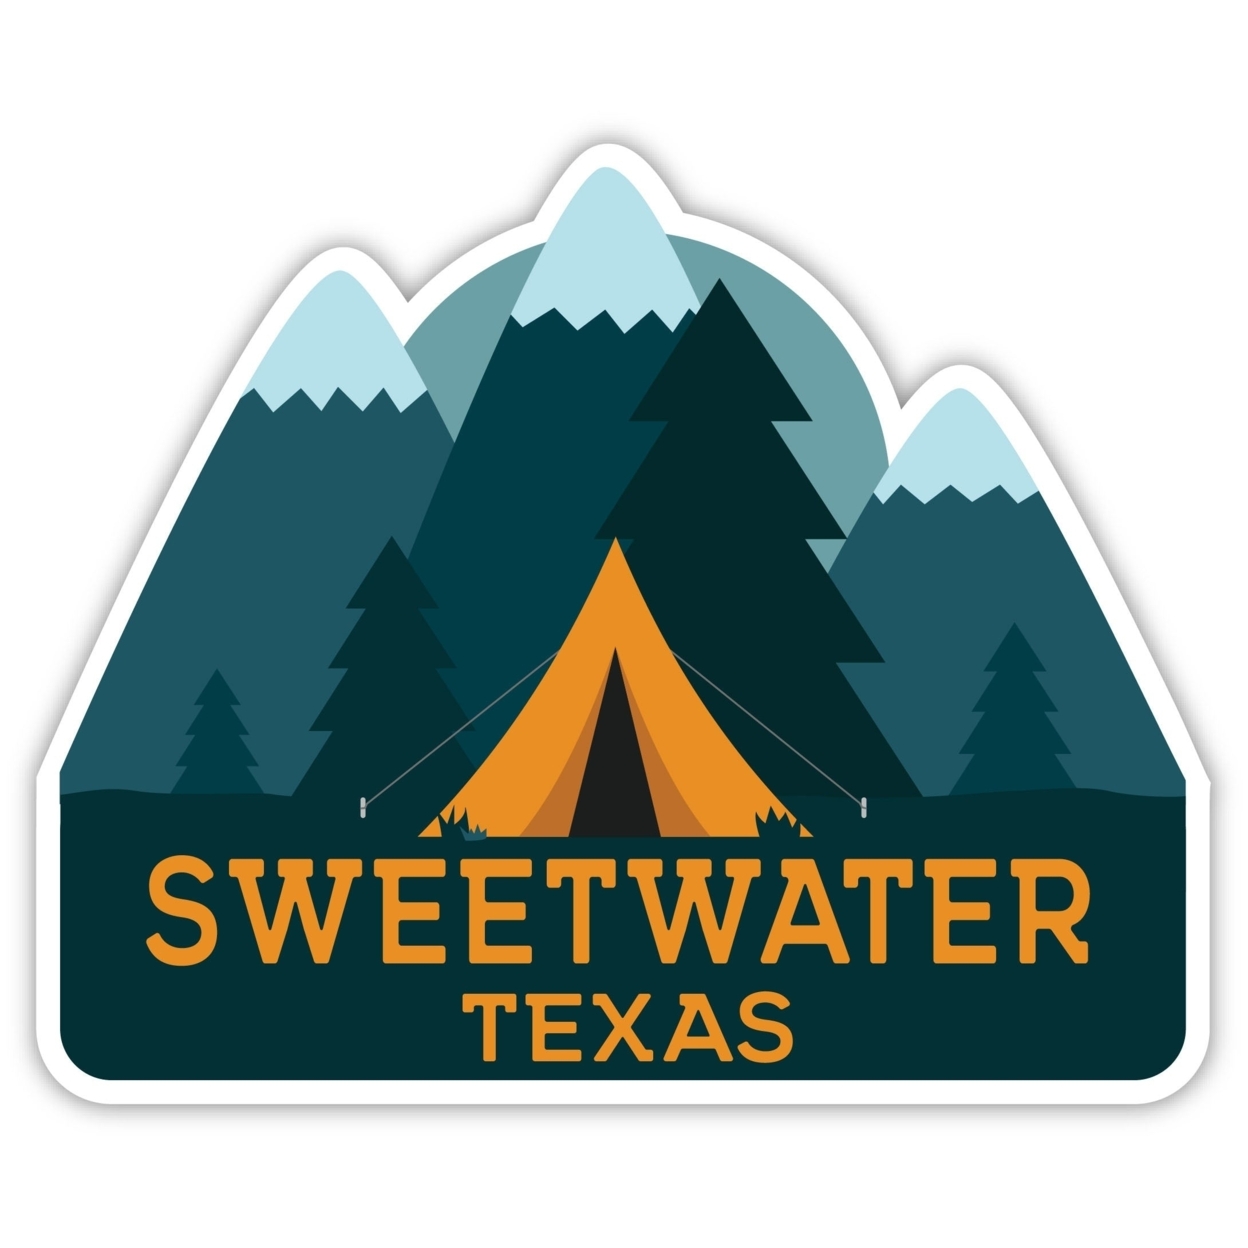 Sweetwater Texas Souvenir Decorative Stickers (Choose Theme And Size) - Single Unit, 2-Inch, Bear